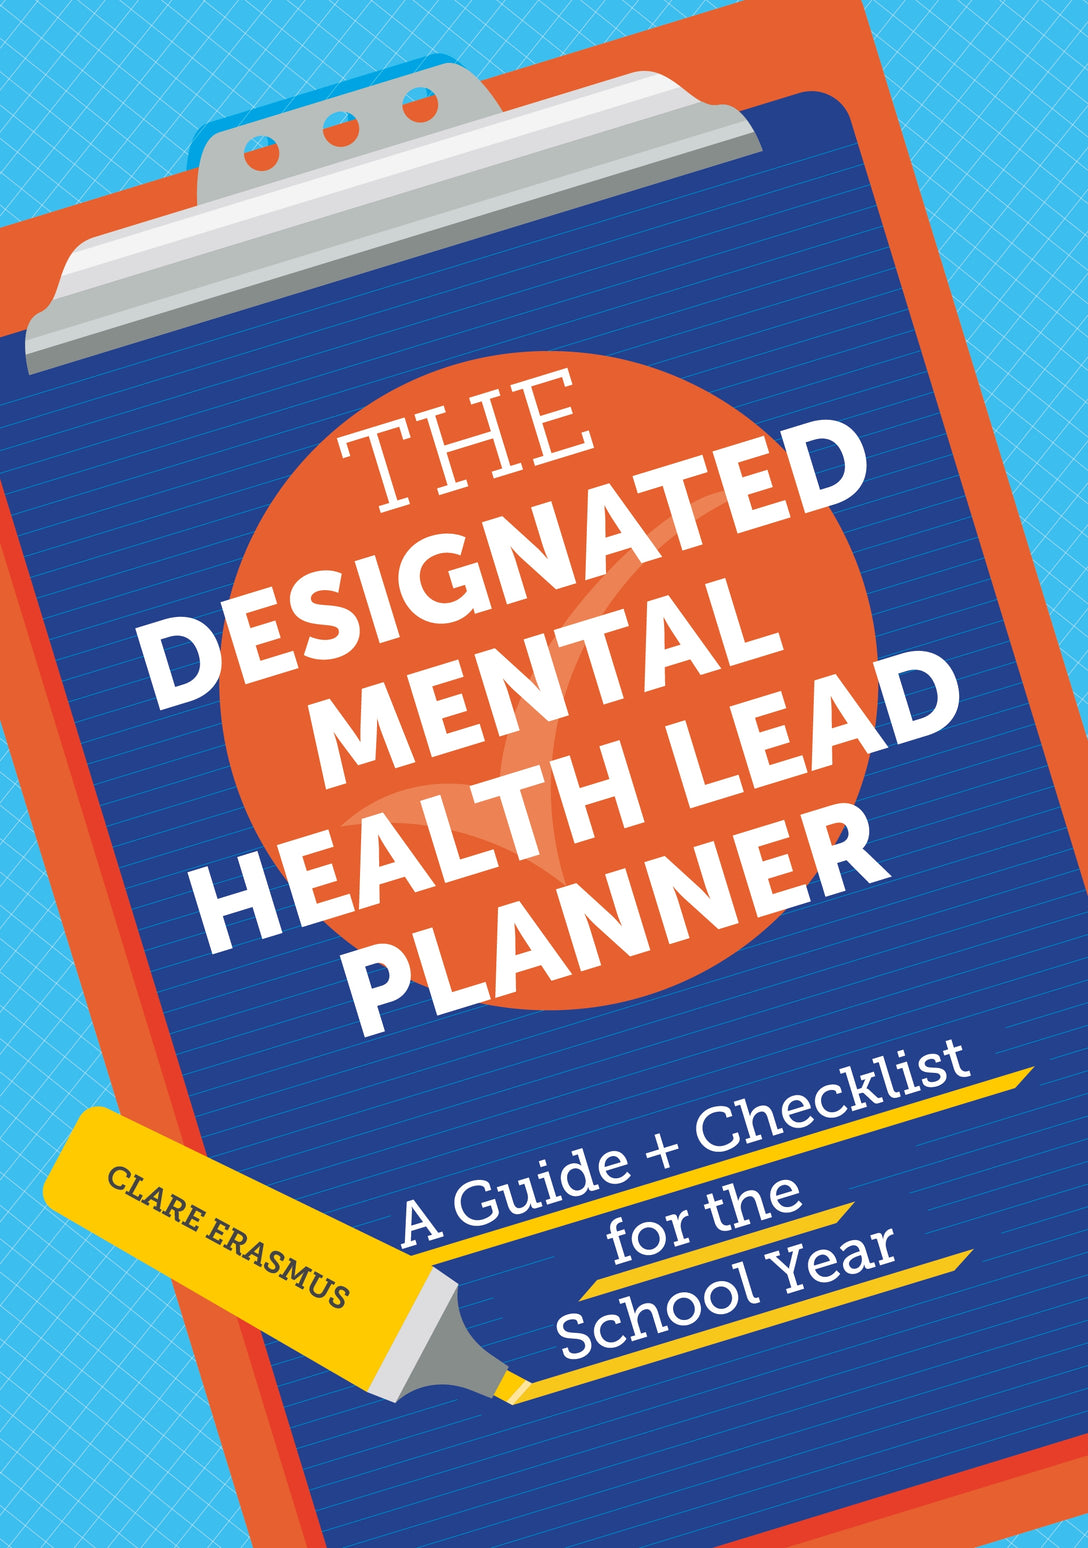 The Designated Mental Health Lead Planner by Clare Erasmus